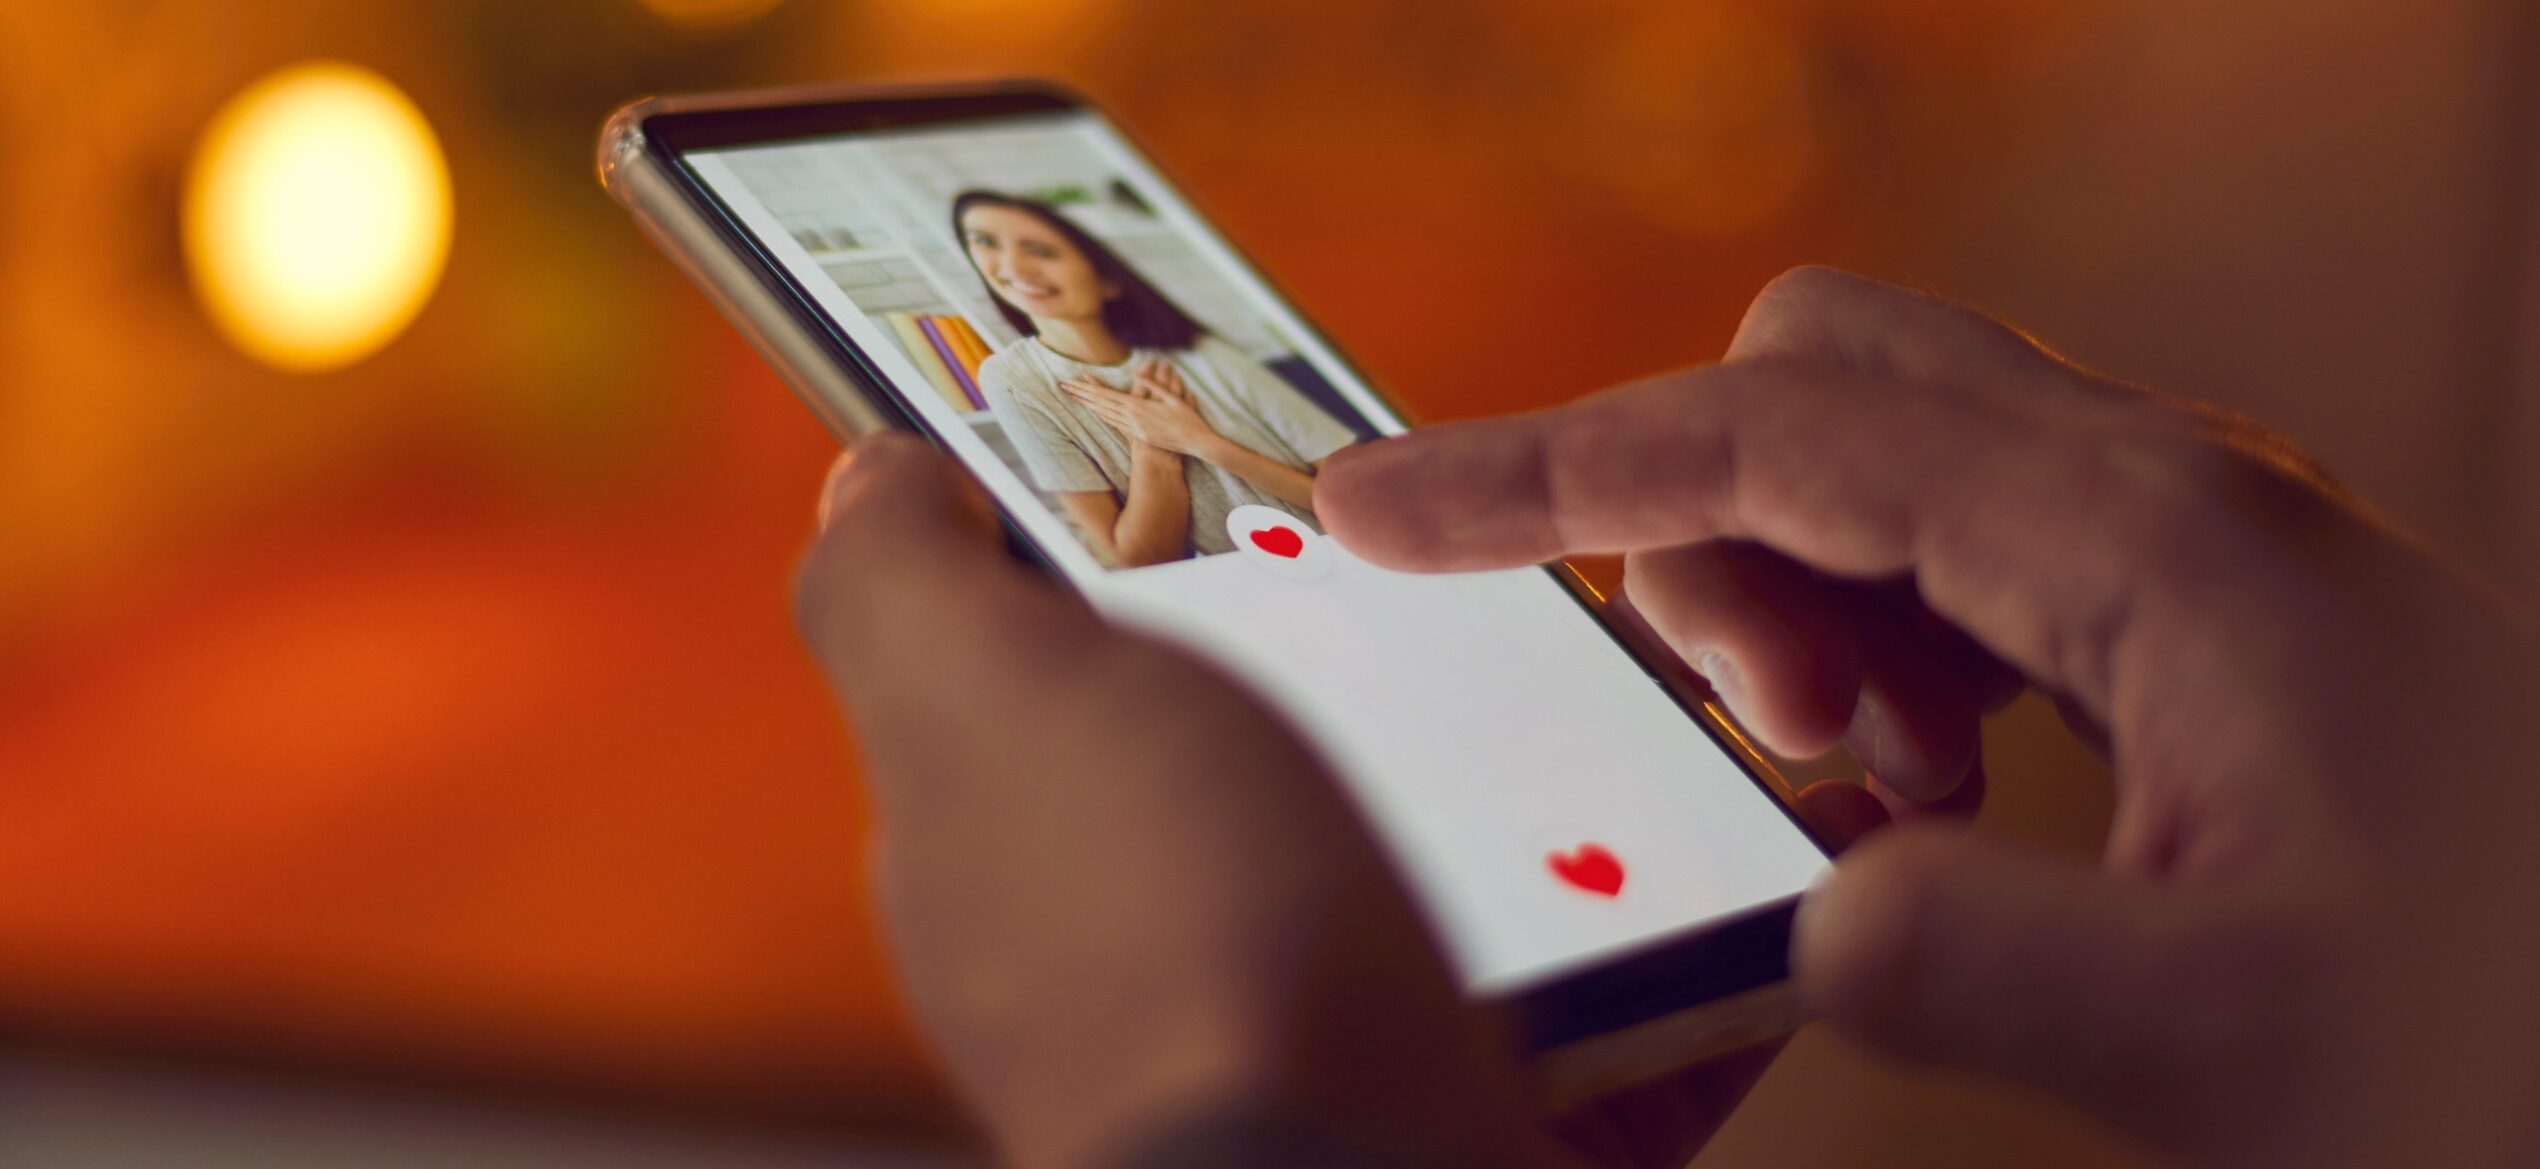 Dating in the Metaverse: Here Are the Latest Apps